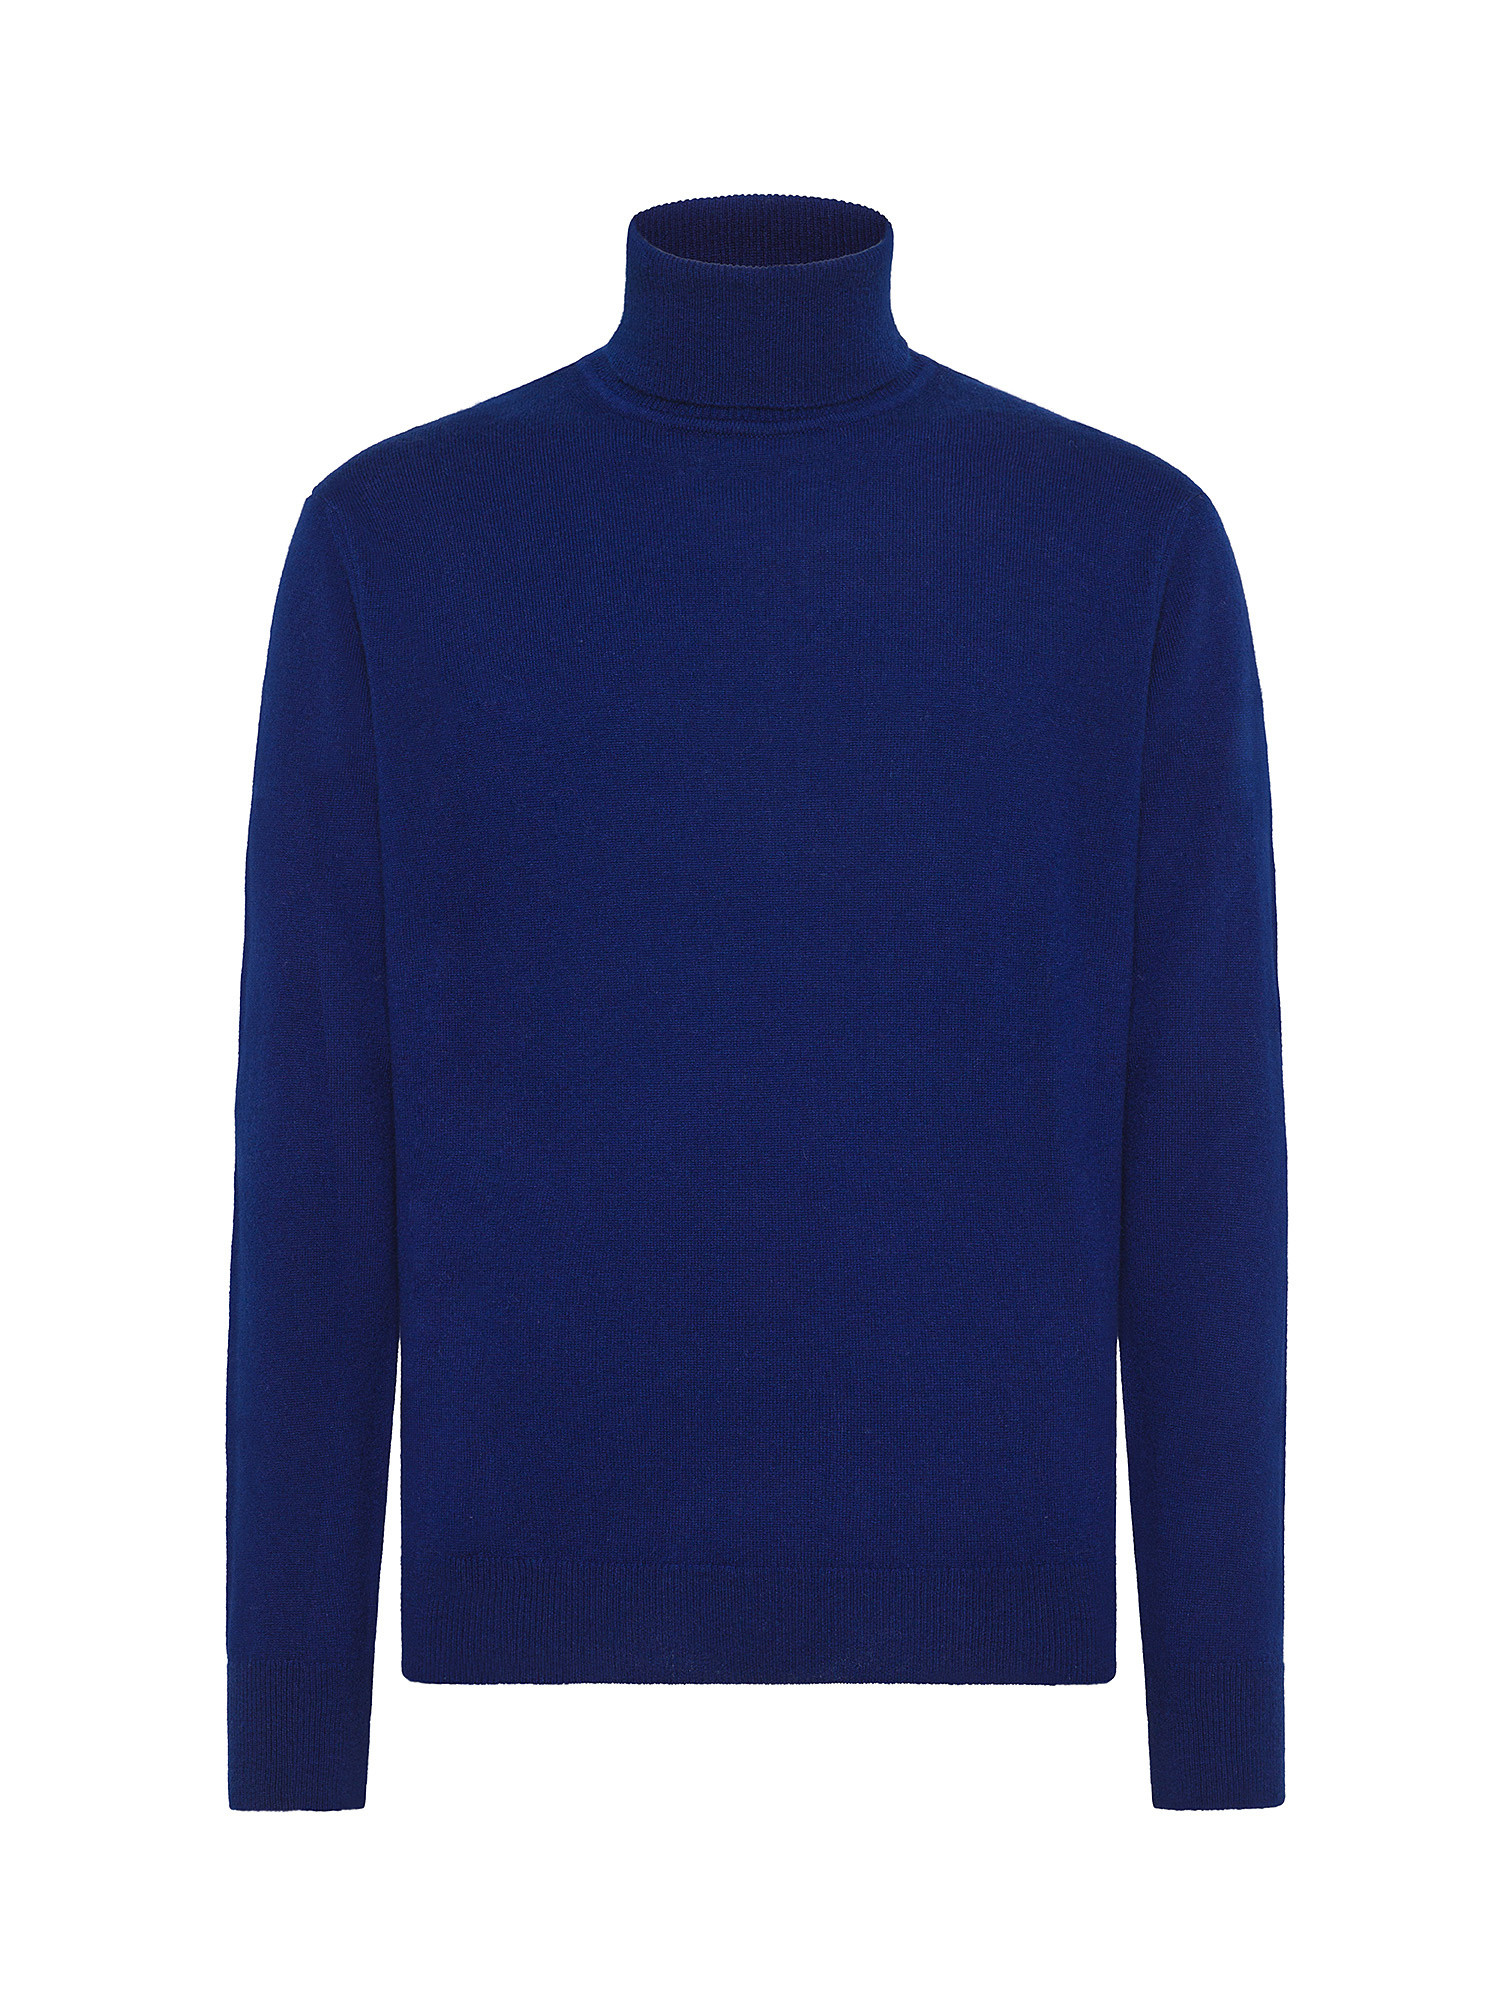 Coin Cashmere - Dolcevita in puro cashmere premium, Blu royal, large image number 0